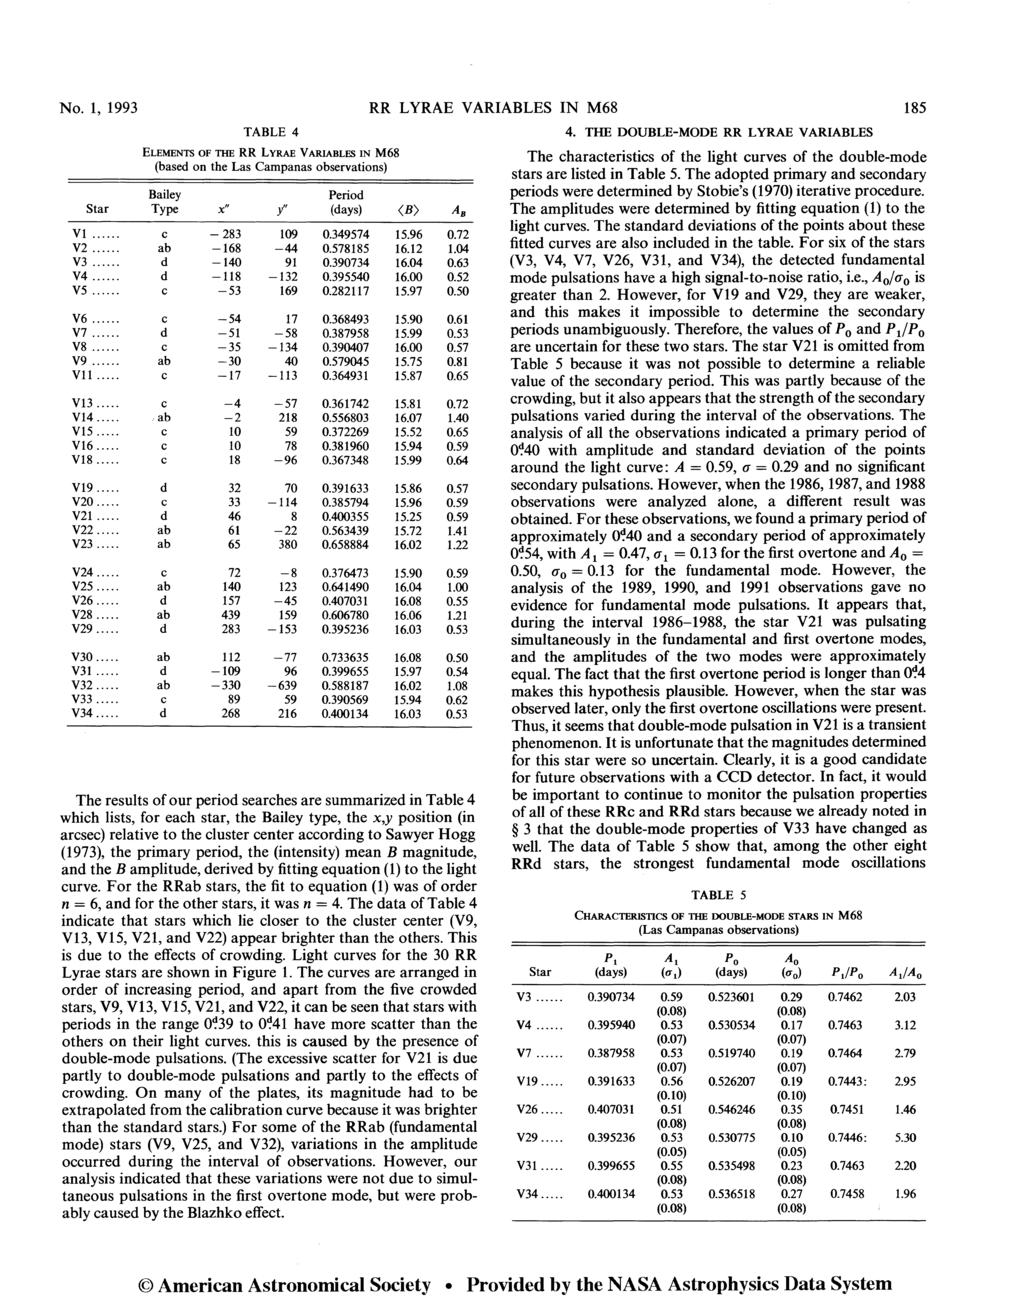 No. 1, 1993 RR L YRAE VARIABLES IN M68 185 TABLE 4 ELEMENTS OF THE RR LYRAE VARIABLES IN M68 (based on the Las Campanas observations) Bailey Period Star Type x" y" (days) <B) AB Vi... c - 283 109 0.